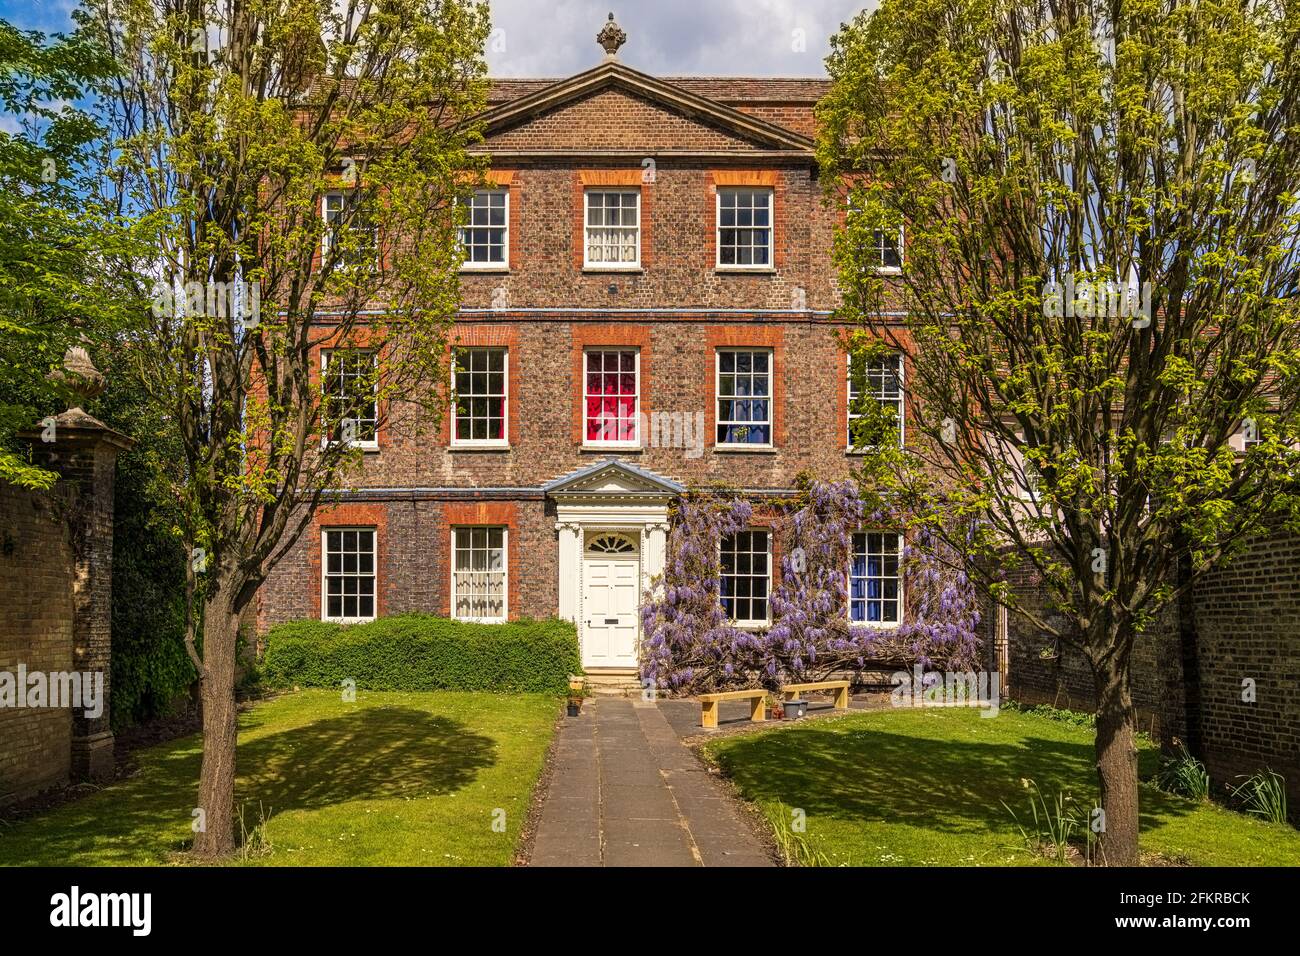 Little Trinity House Cambridge - dating from 1725, Grade I listed C18th domestic house, now used as student accommodation. Stock Photo